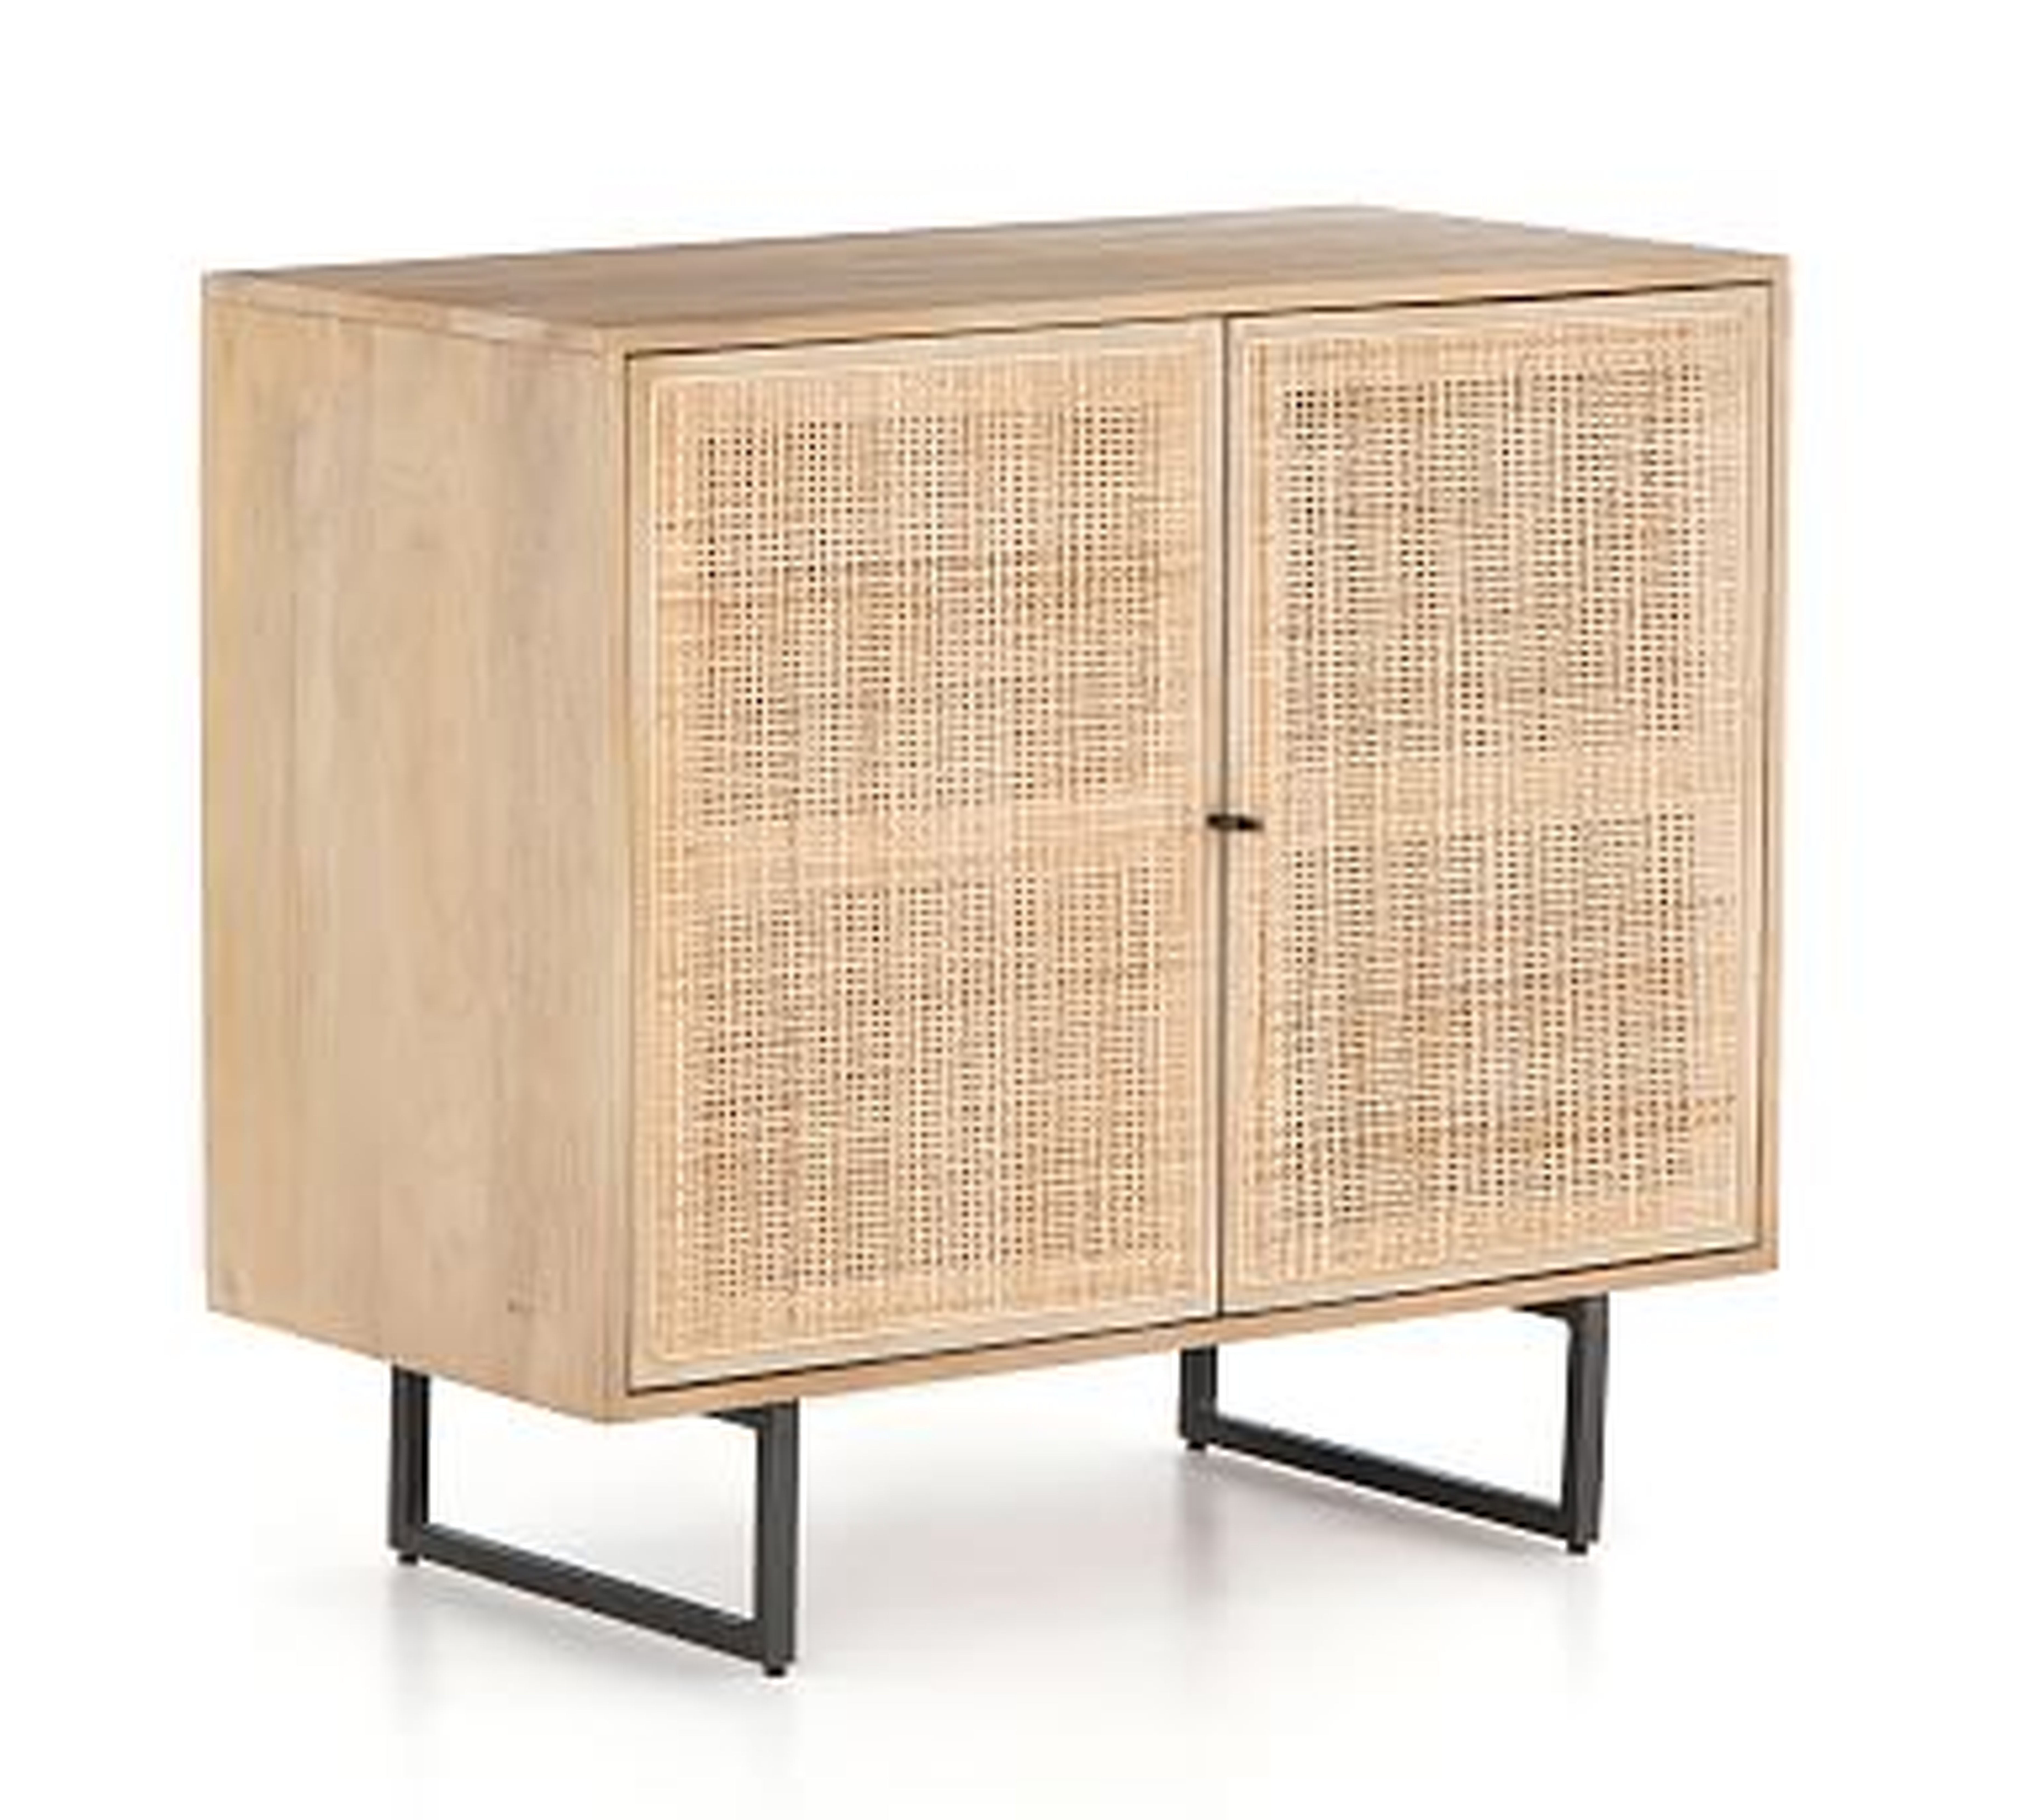 Dolores 35" x 32" Cane 2-Door Cabinet, Natural - Pottery Barn